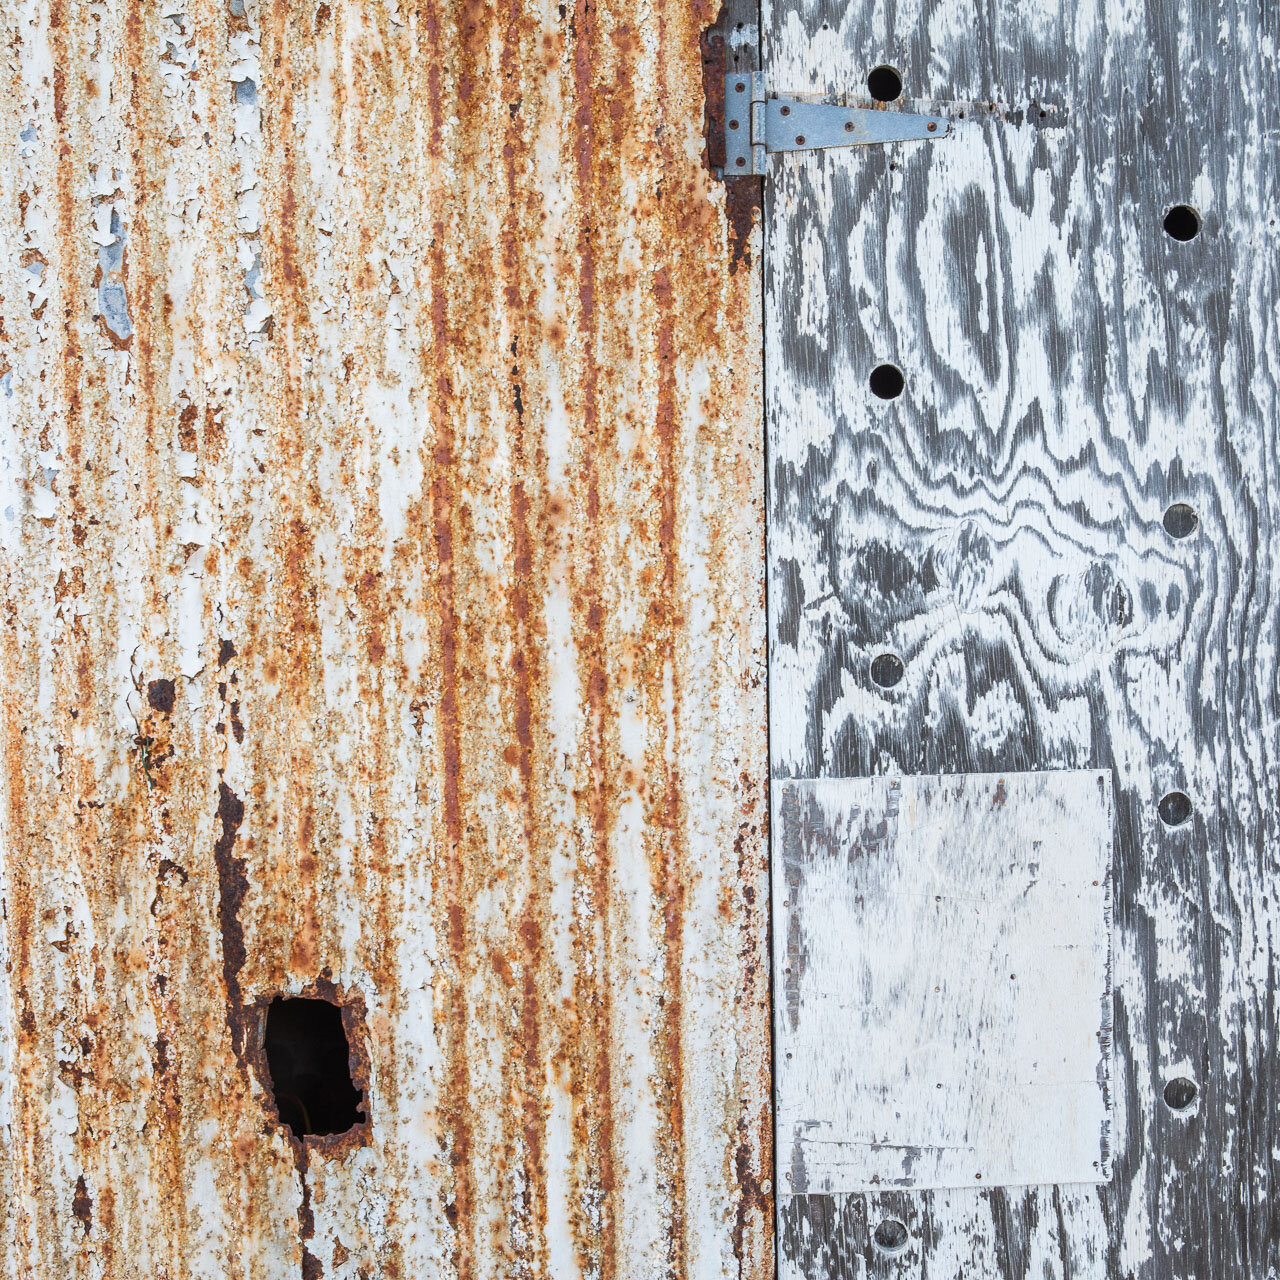 Textures in metal and rust, wood and paint on the outside of an Abrolhos Islands shack